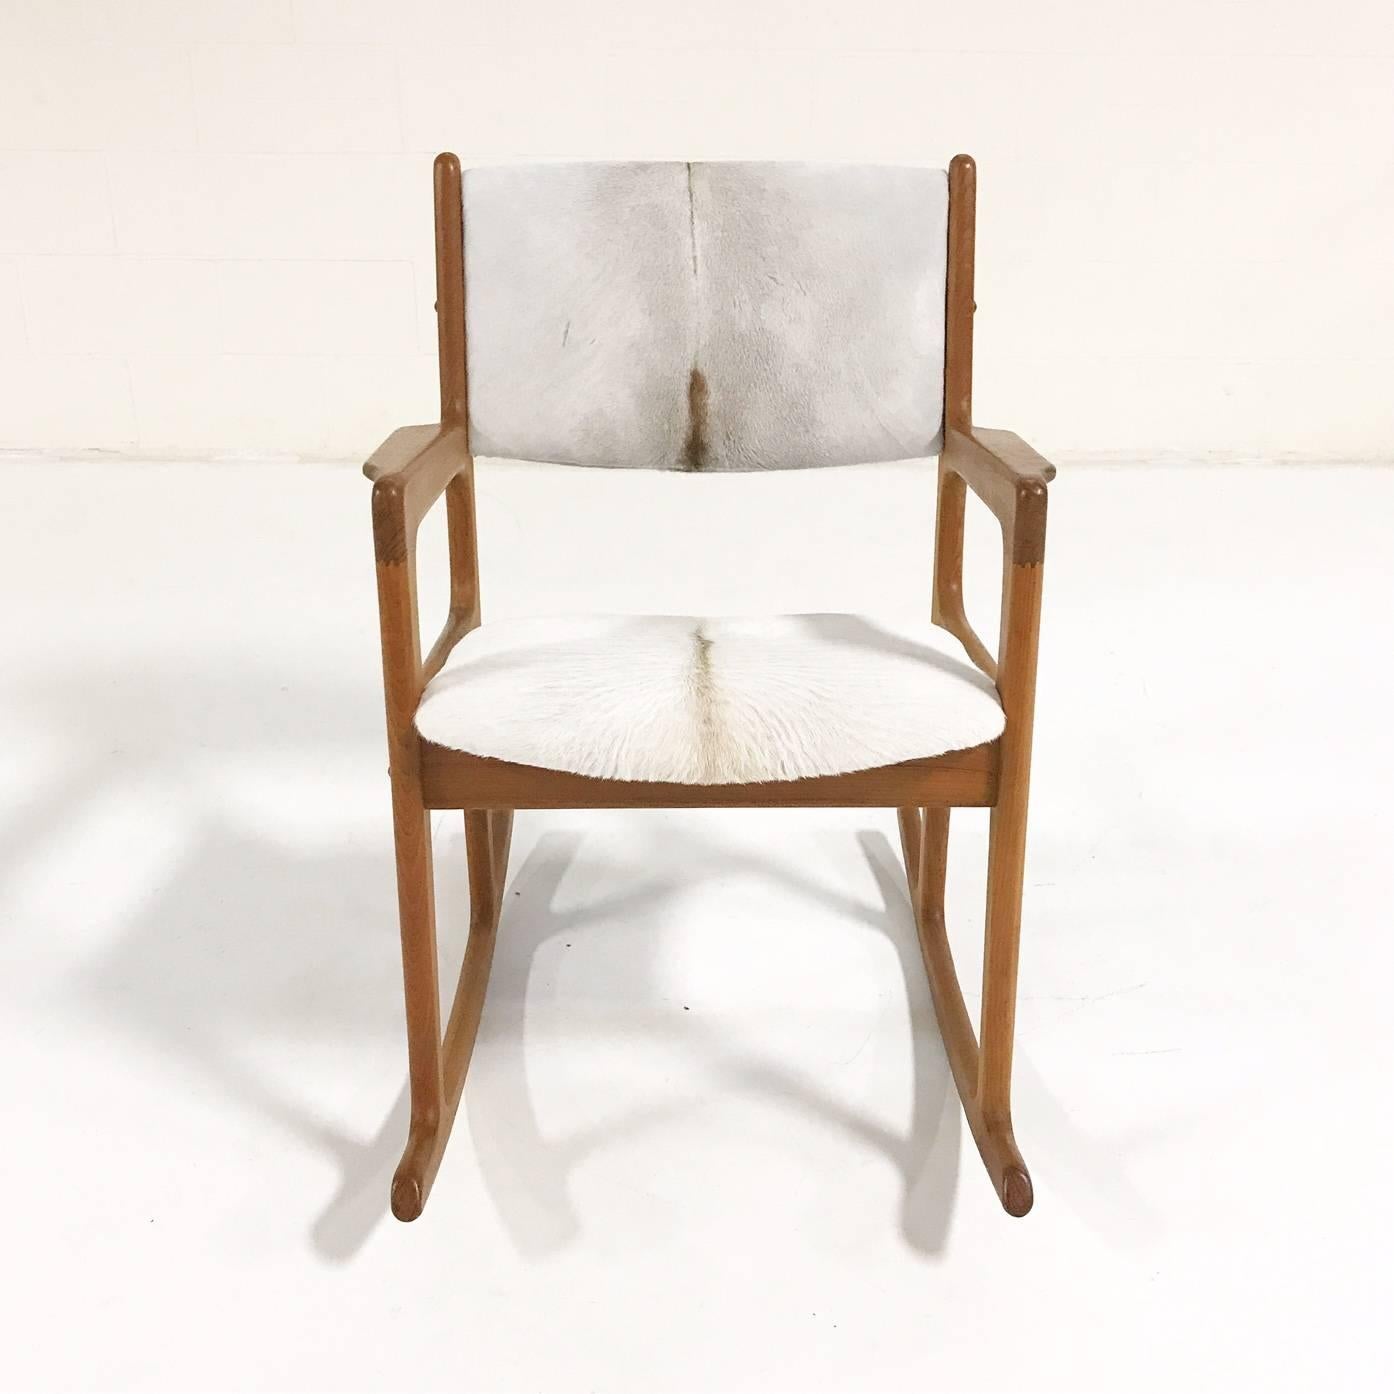 We collected this mint vintage rocking chair by great Danish designer, Benny Linden. We adored the beautifully sculpted lines solidly built teak. We restored the upholstery with our ivory hued Brazilian calfskin, the silkiest, most comfortable seat!